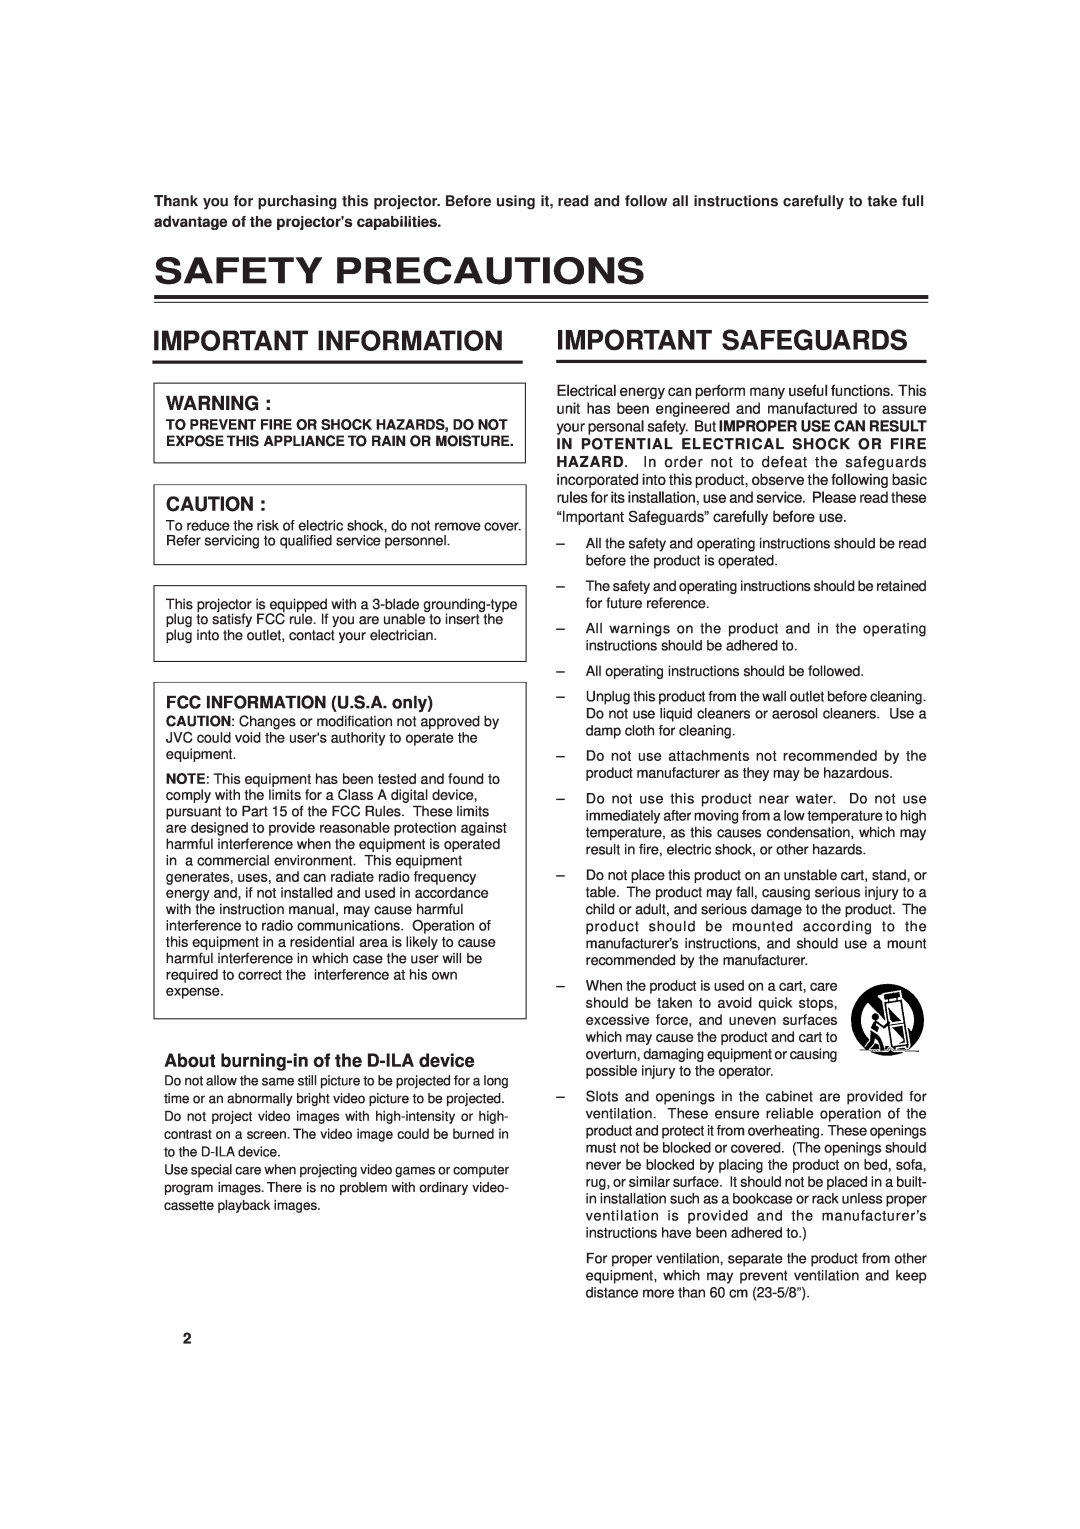 JVC DLA-G20U manual Safety Precautions, Important Information Important Safeguards, About burning-in of the D-ILA device 